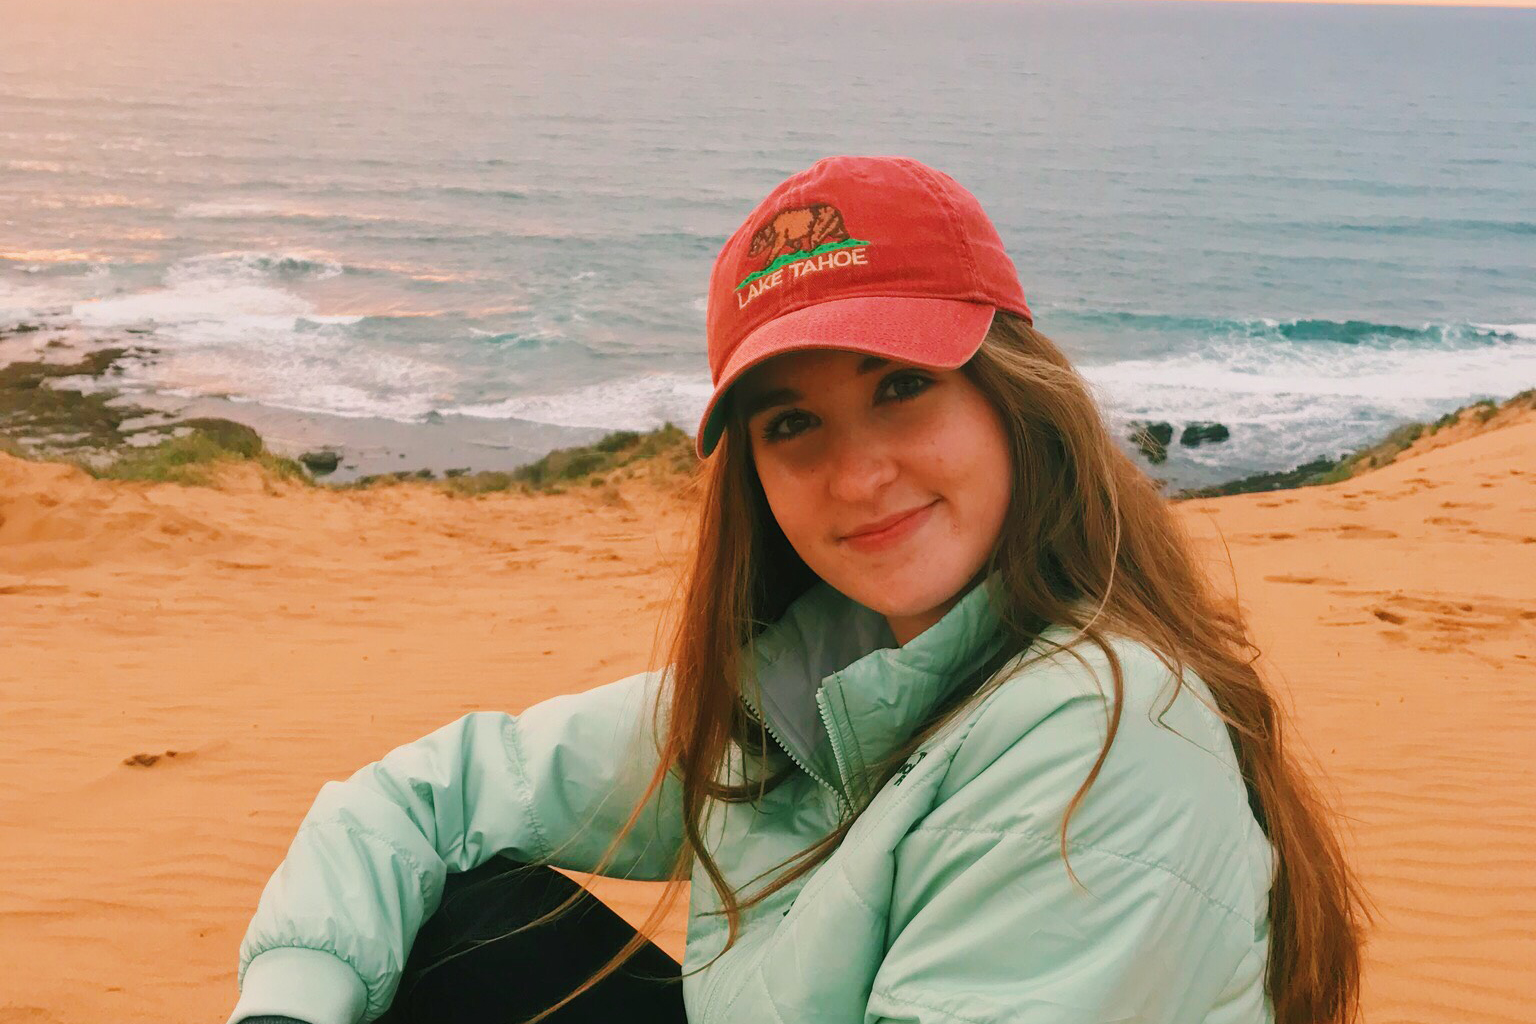 Erin Coltharp smiles in front of an ocean sunset wearing a blue jacket and red Lake Tahoe hat